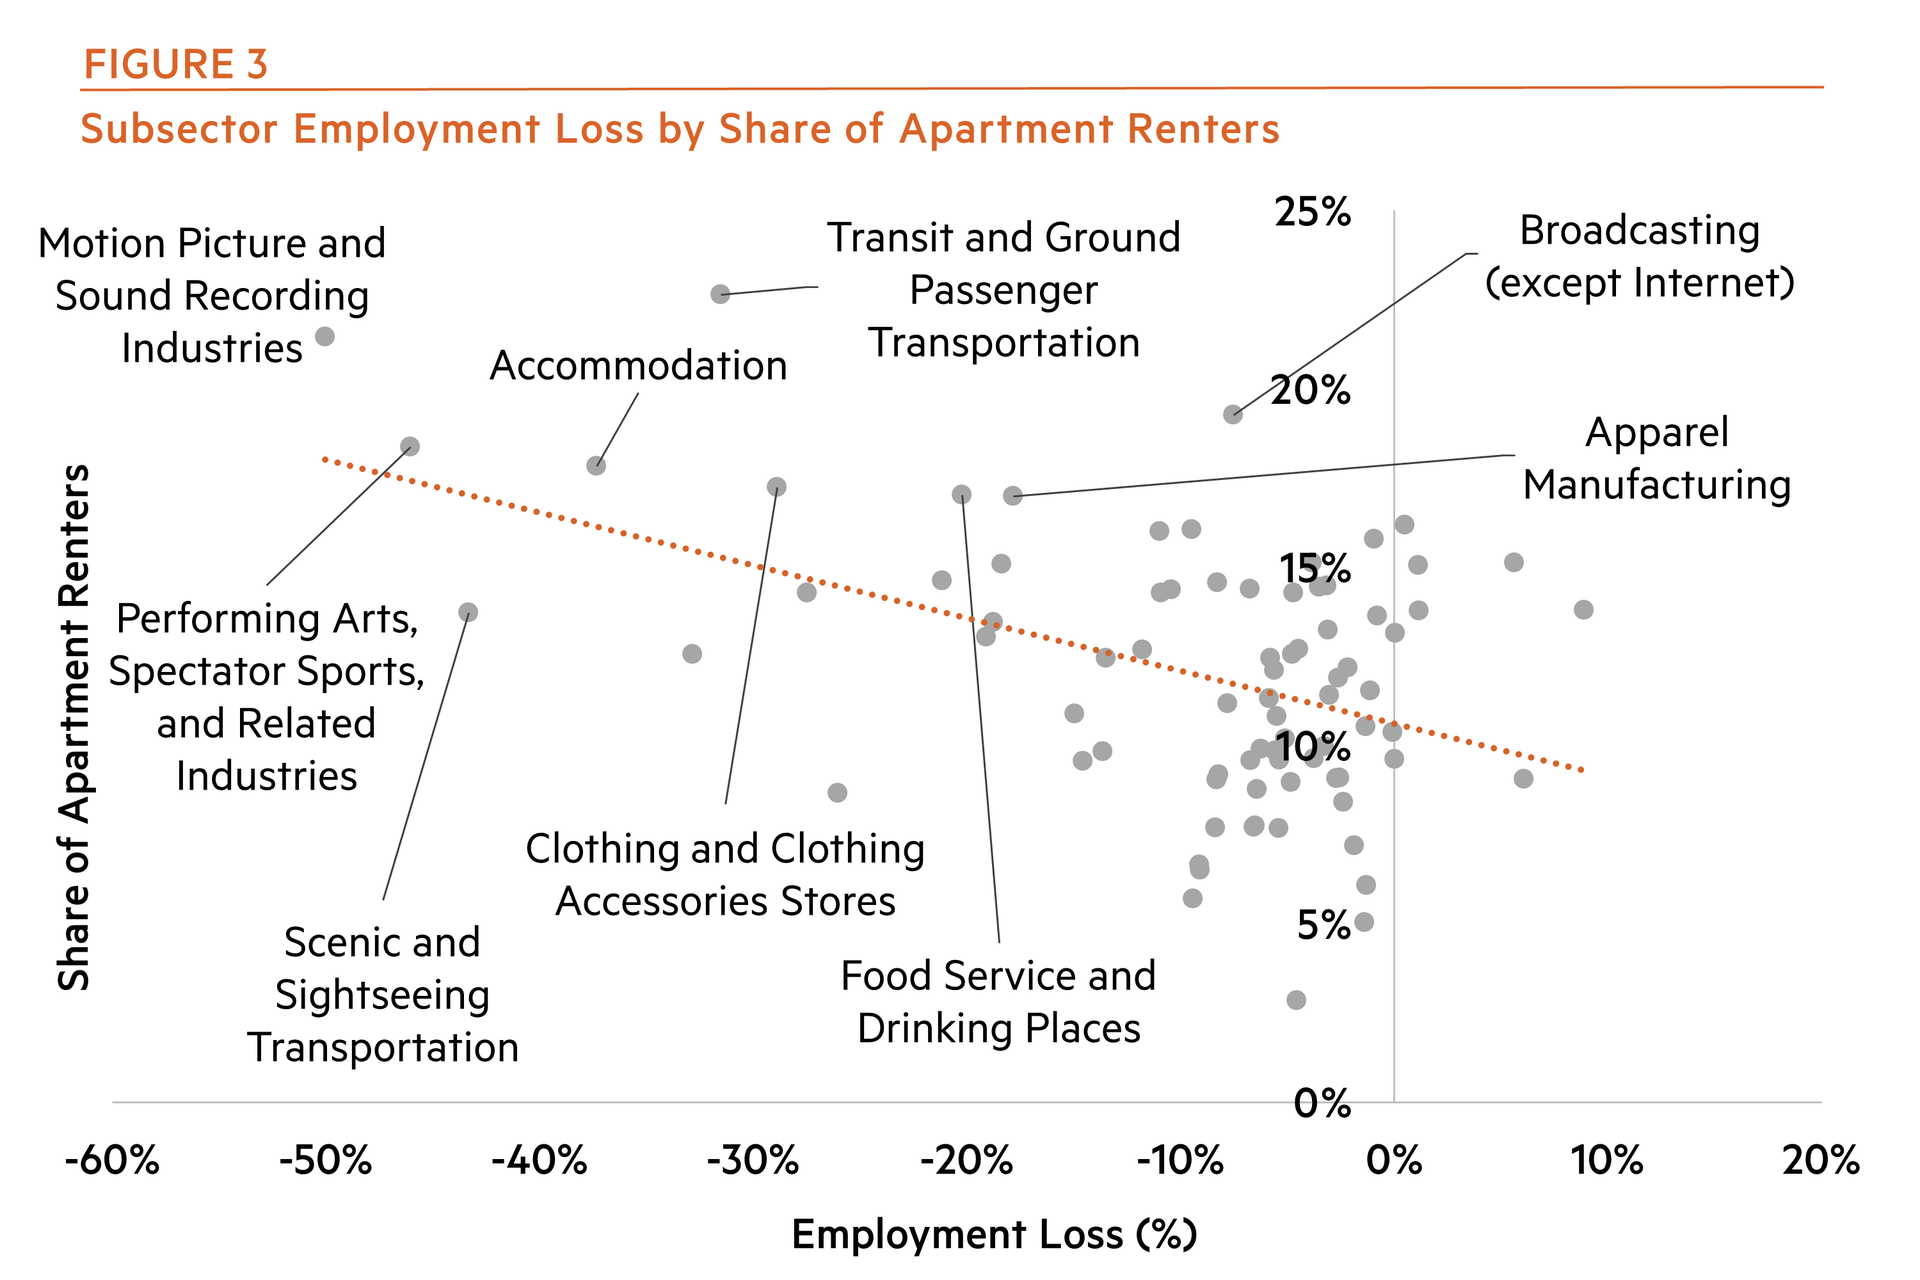 Subsector Employment Loss by Share of Apartment Renters